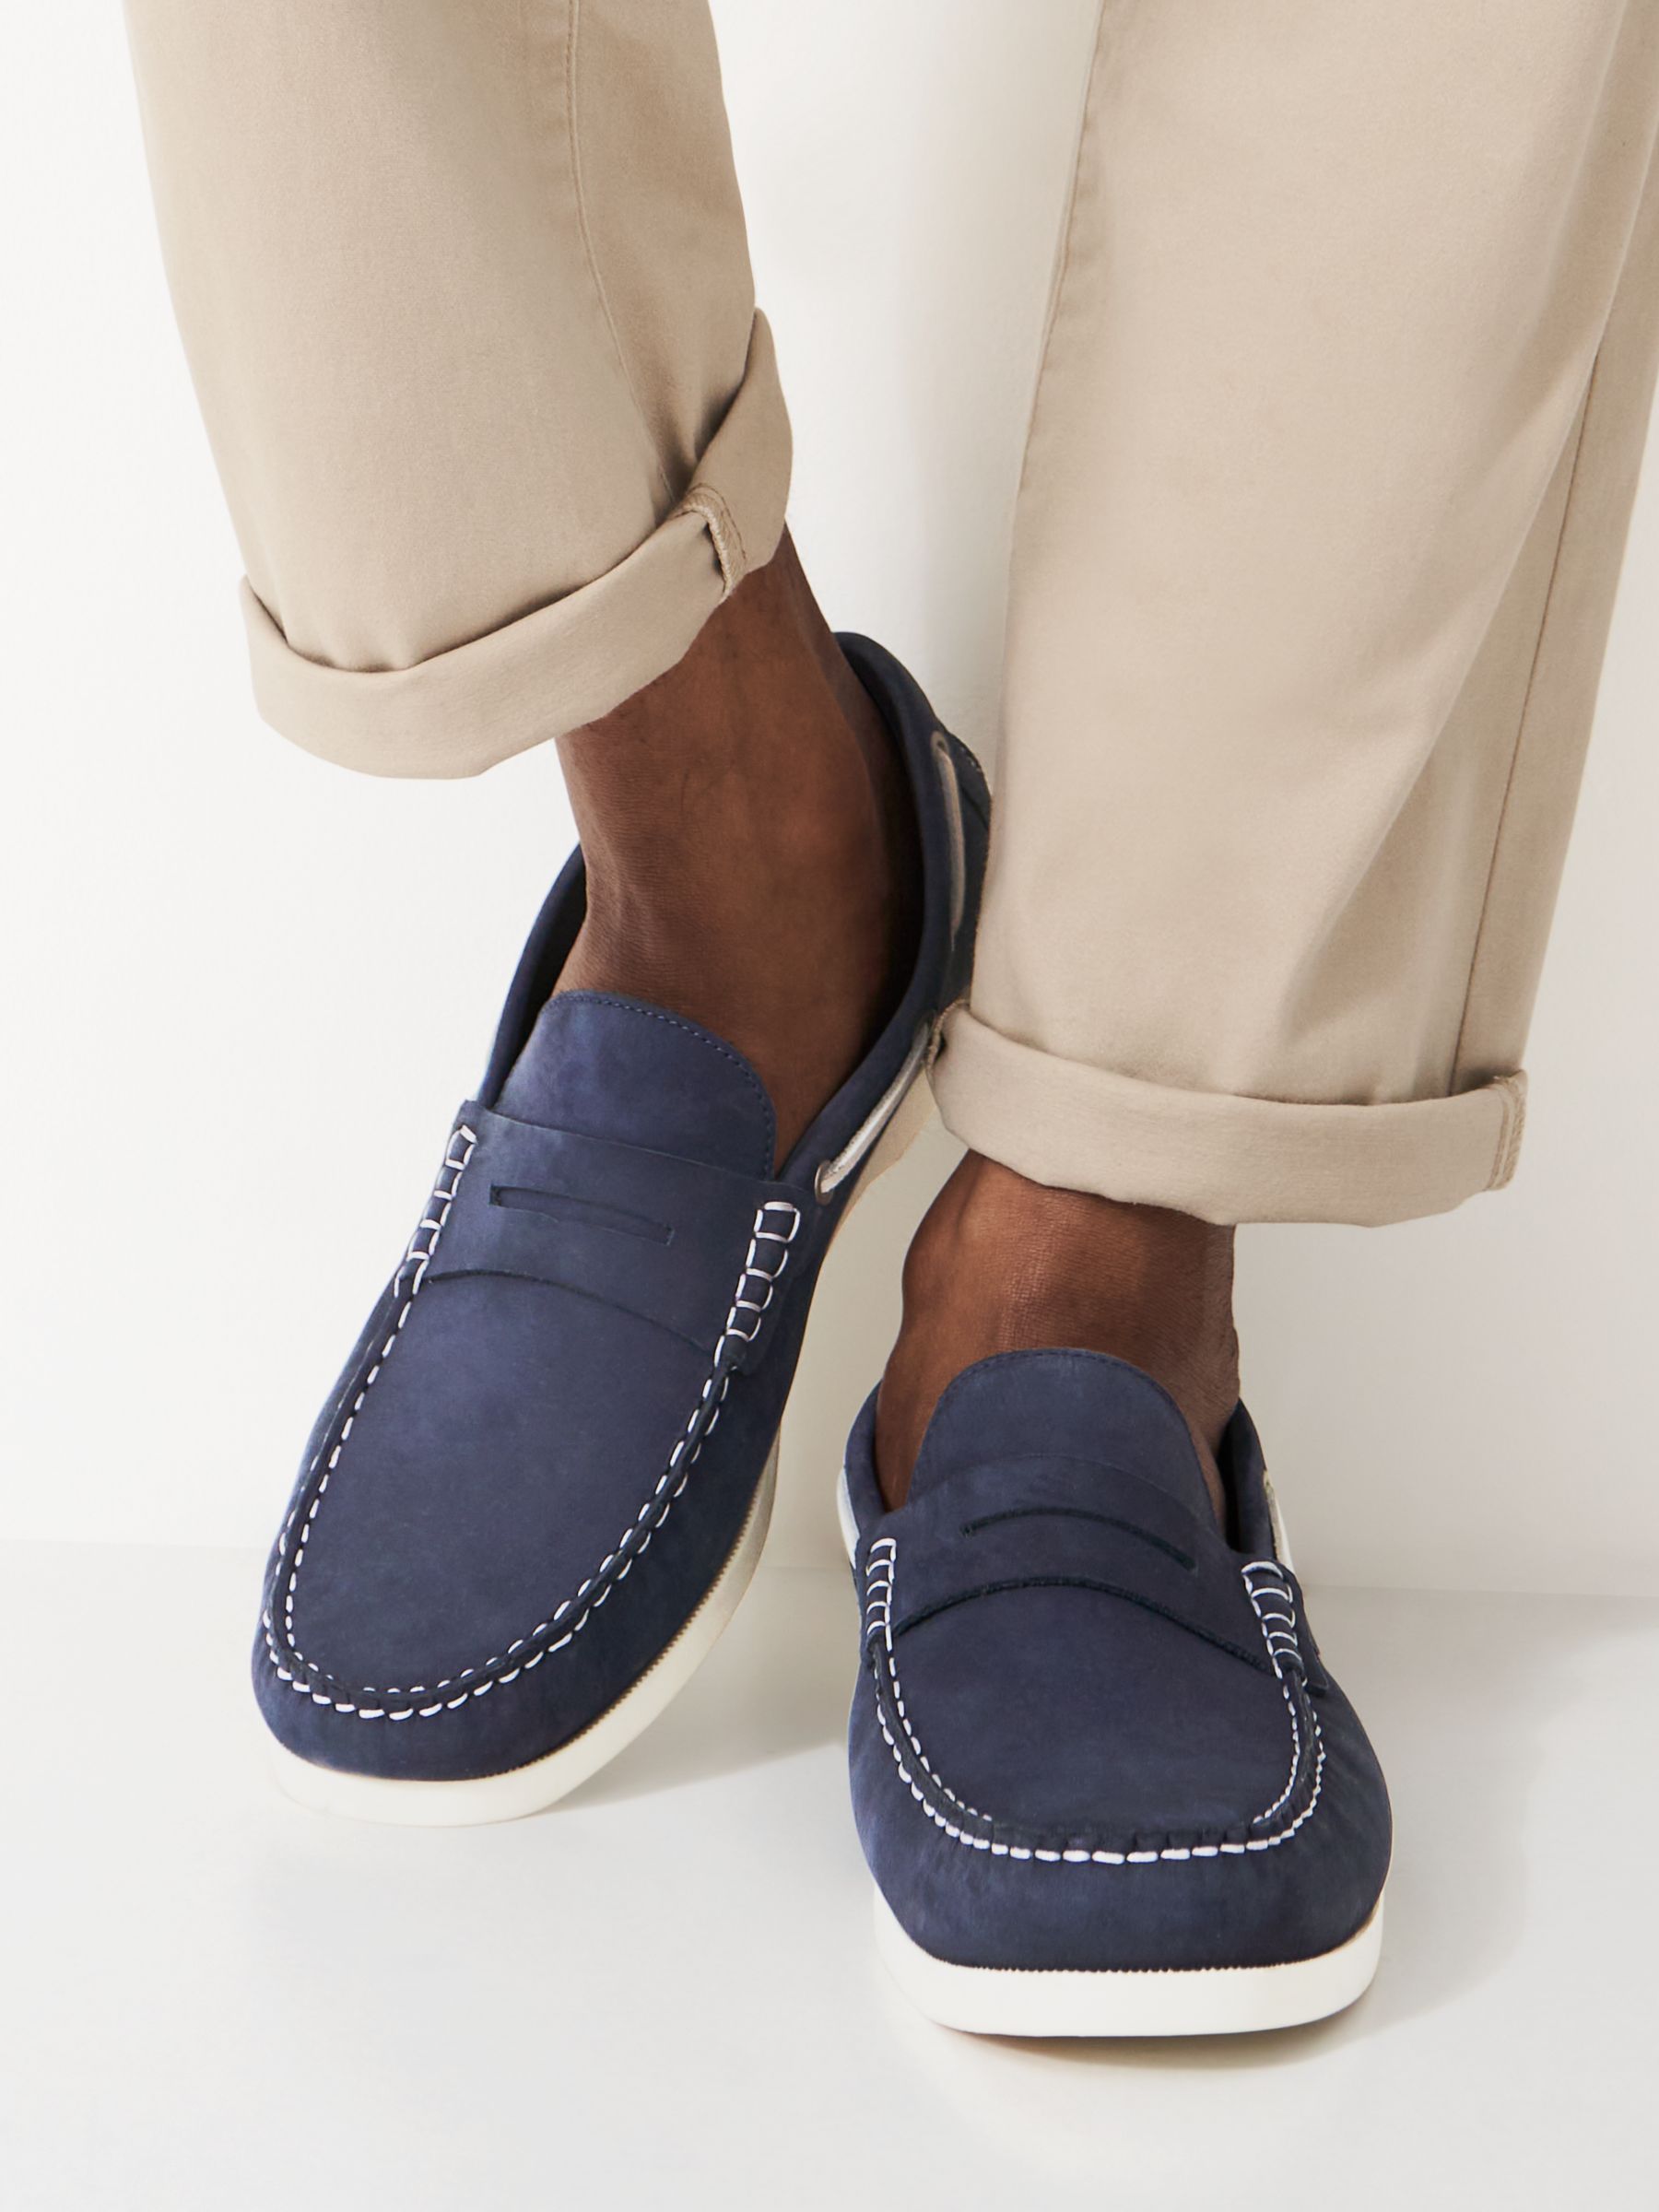 Buy Crew Clothing Slip On Classic Deck Shoes, Navy Blue Online at johnlewis.com